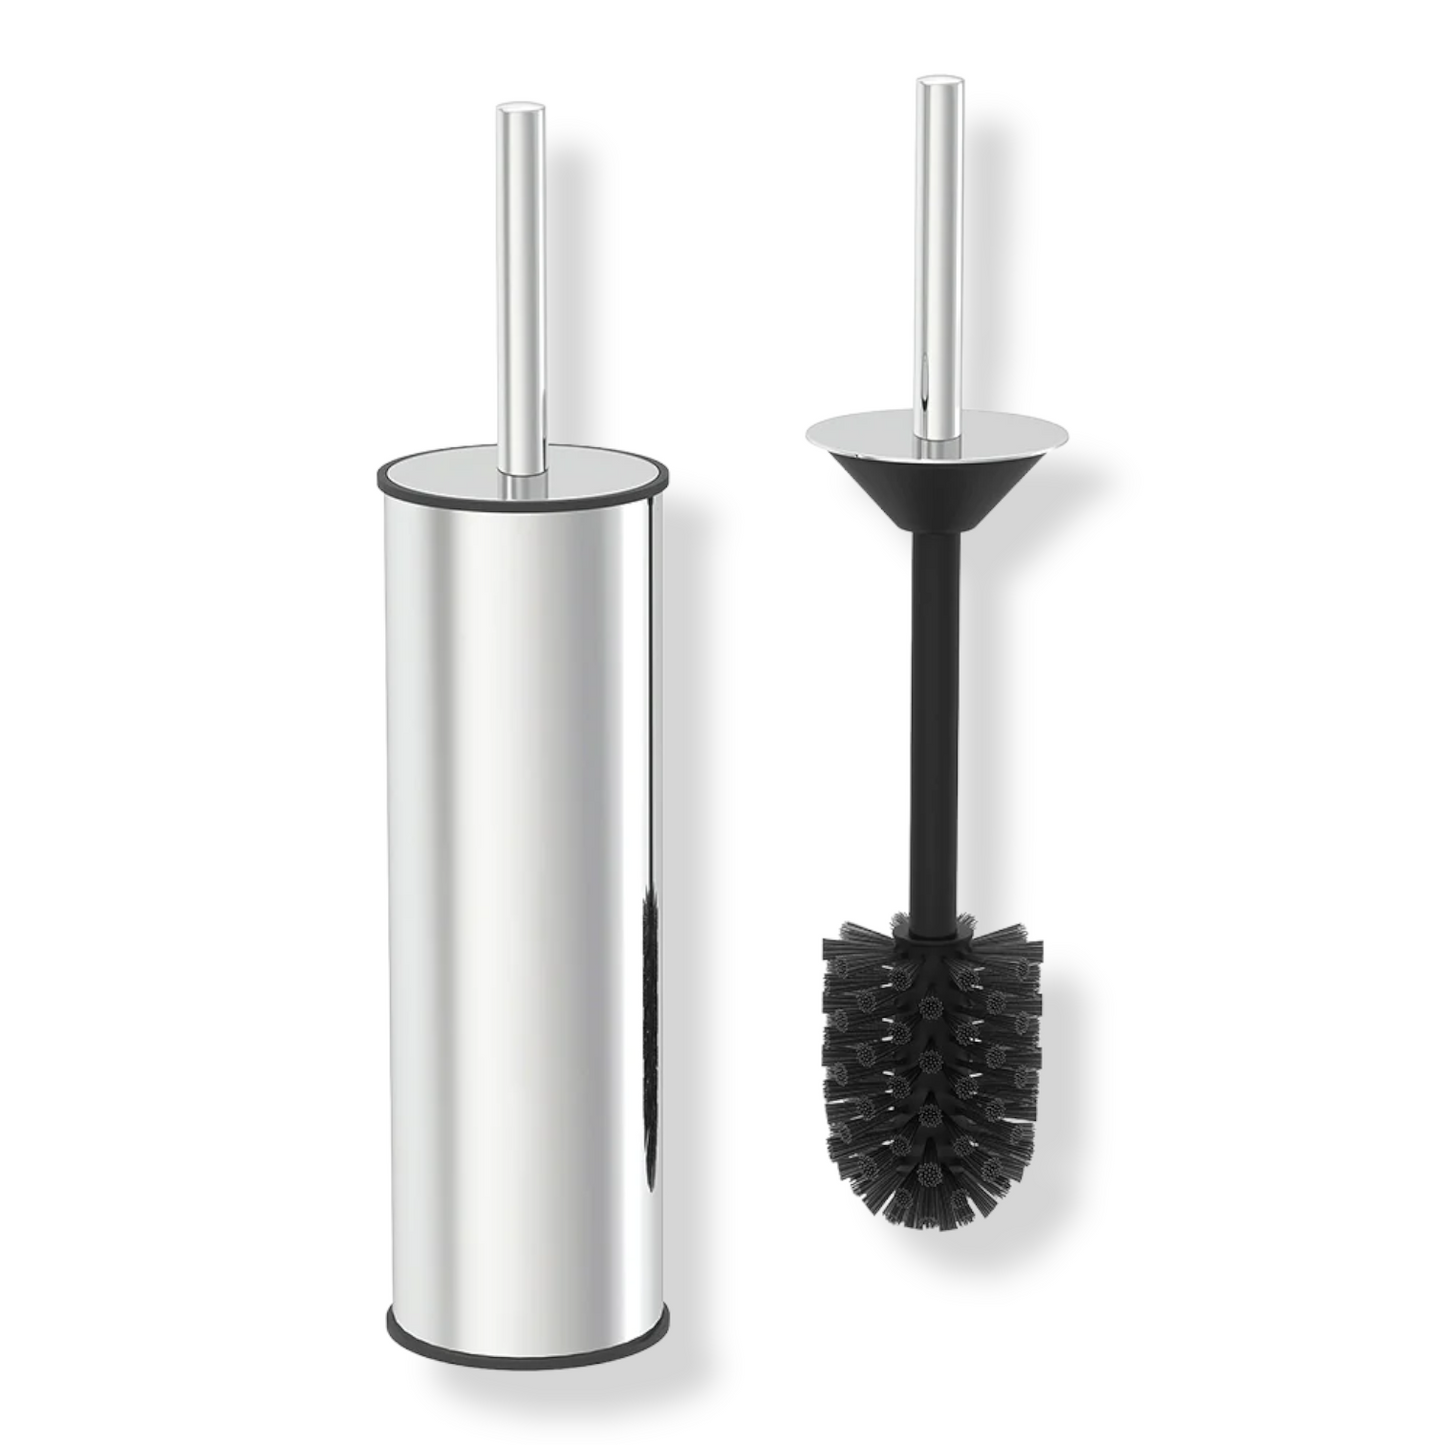 Toilet brush with long stainless steel holder - Lunaz Shop